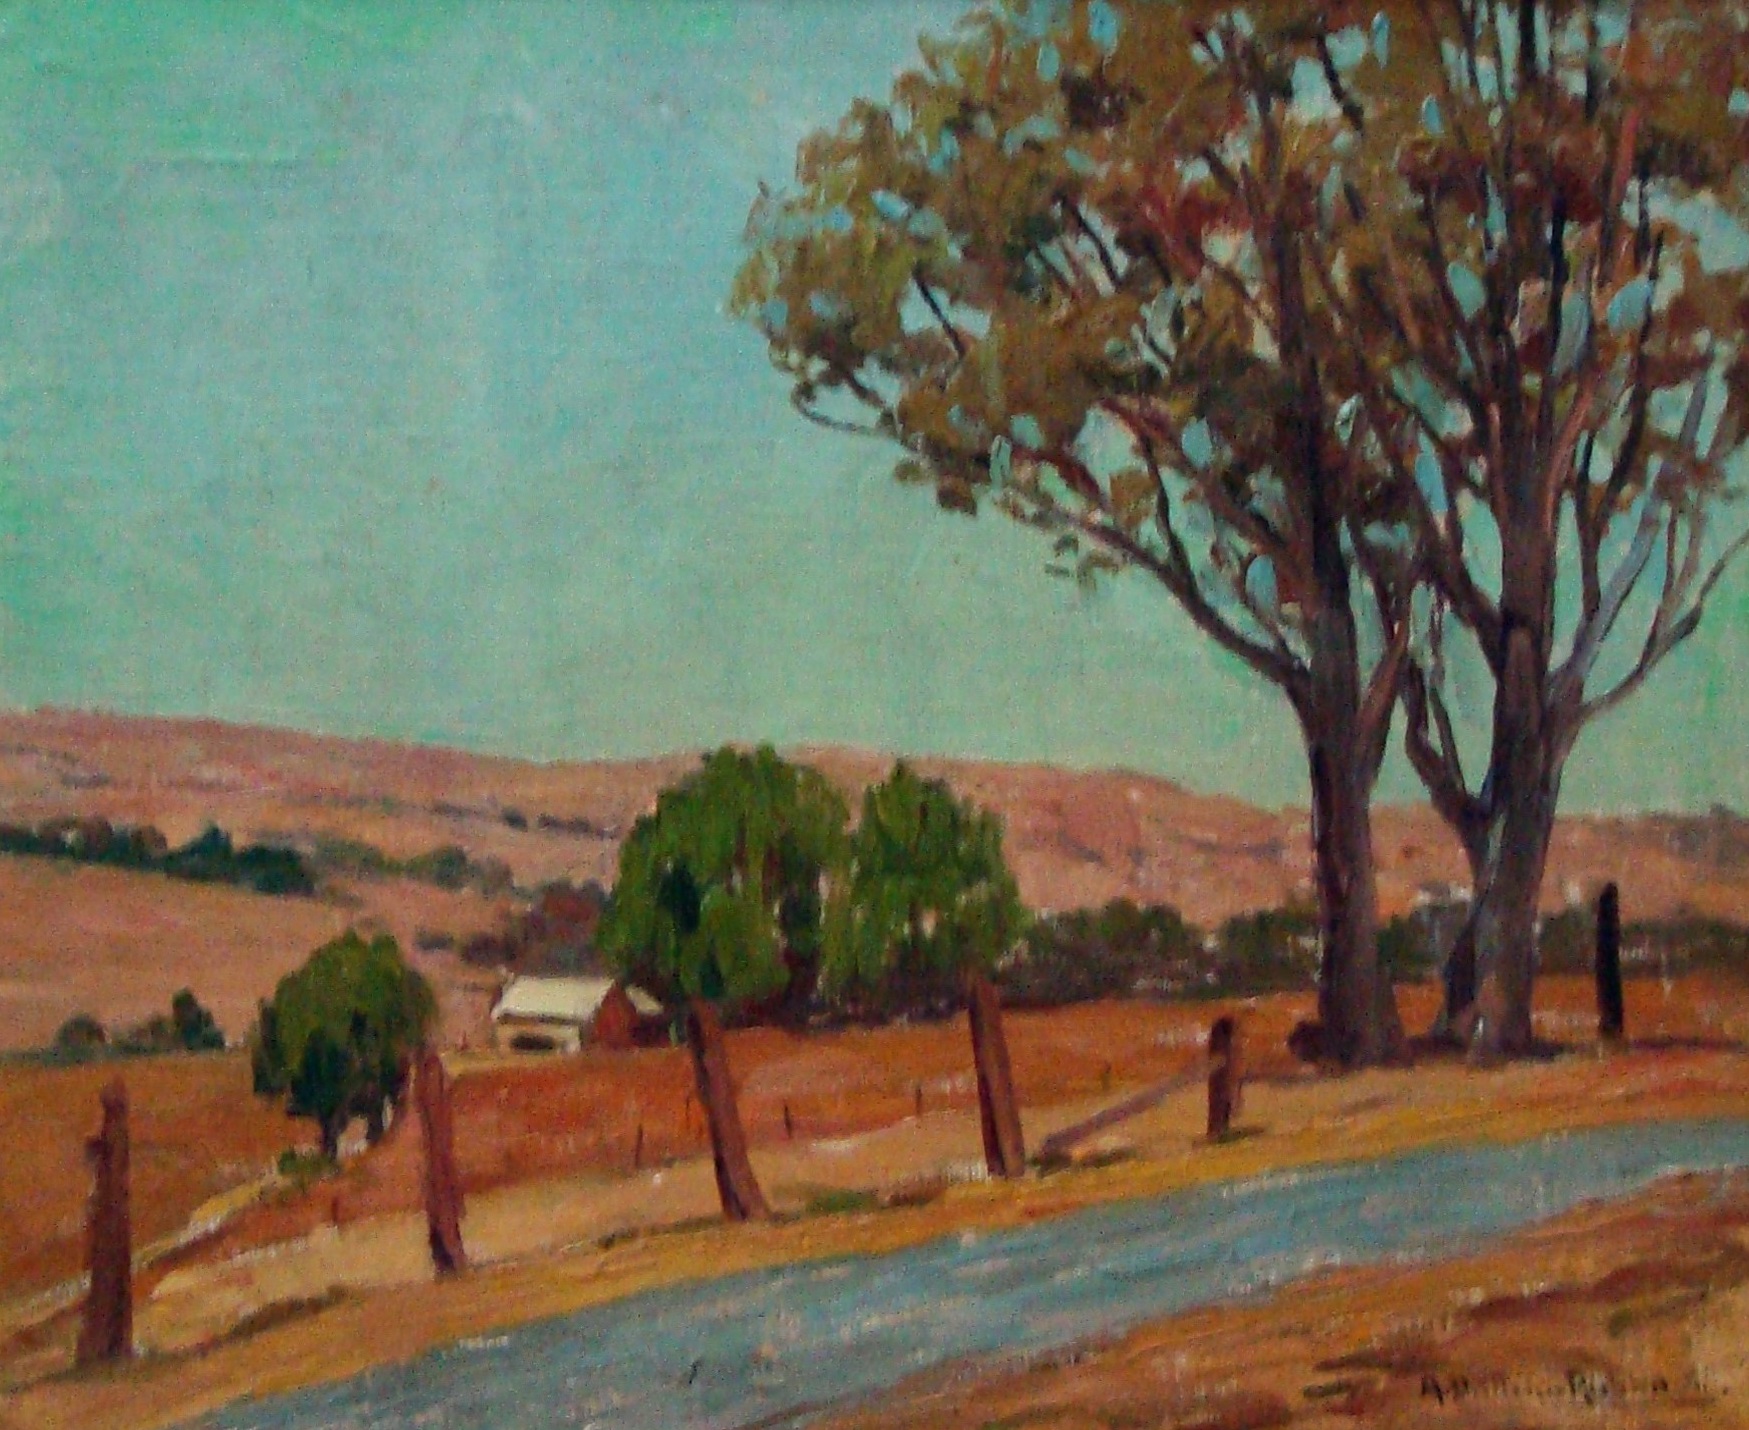 A1237_Anthony_Dattilo-Rubbo_The_Road_to_Burragorang_31_x_38cm_Gift_from_Janet_Gow_2014.jpg